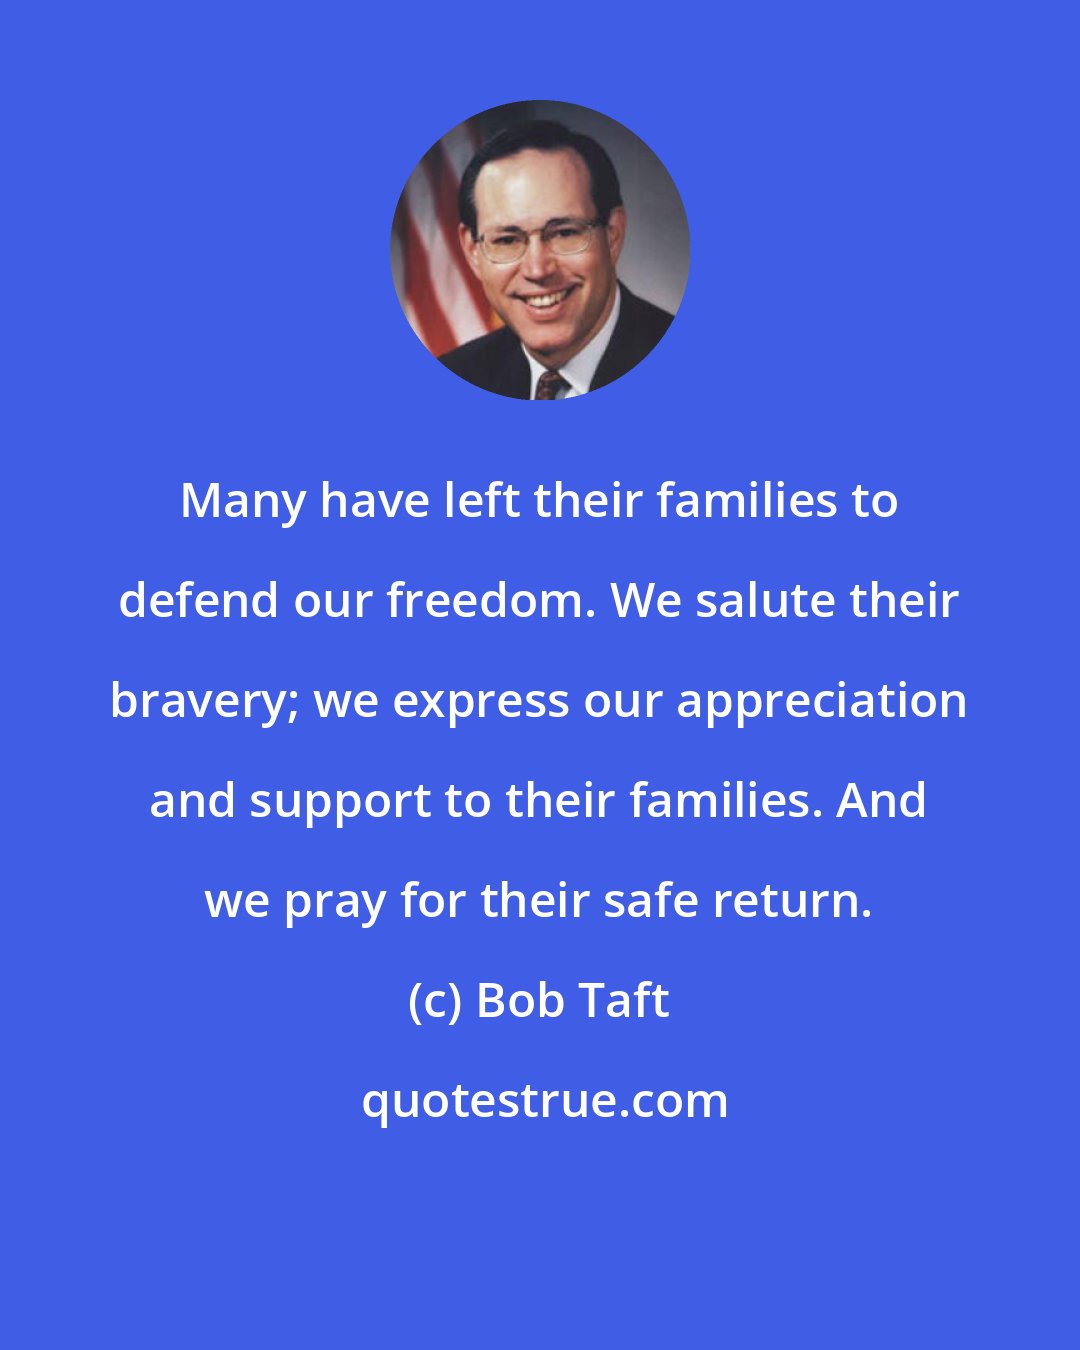 Bob Taft: Many have left their families to defend our freedom. We salute their bravery; we express our appreciation and support to their families. And we pray for their safe return.